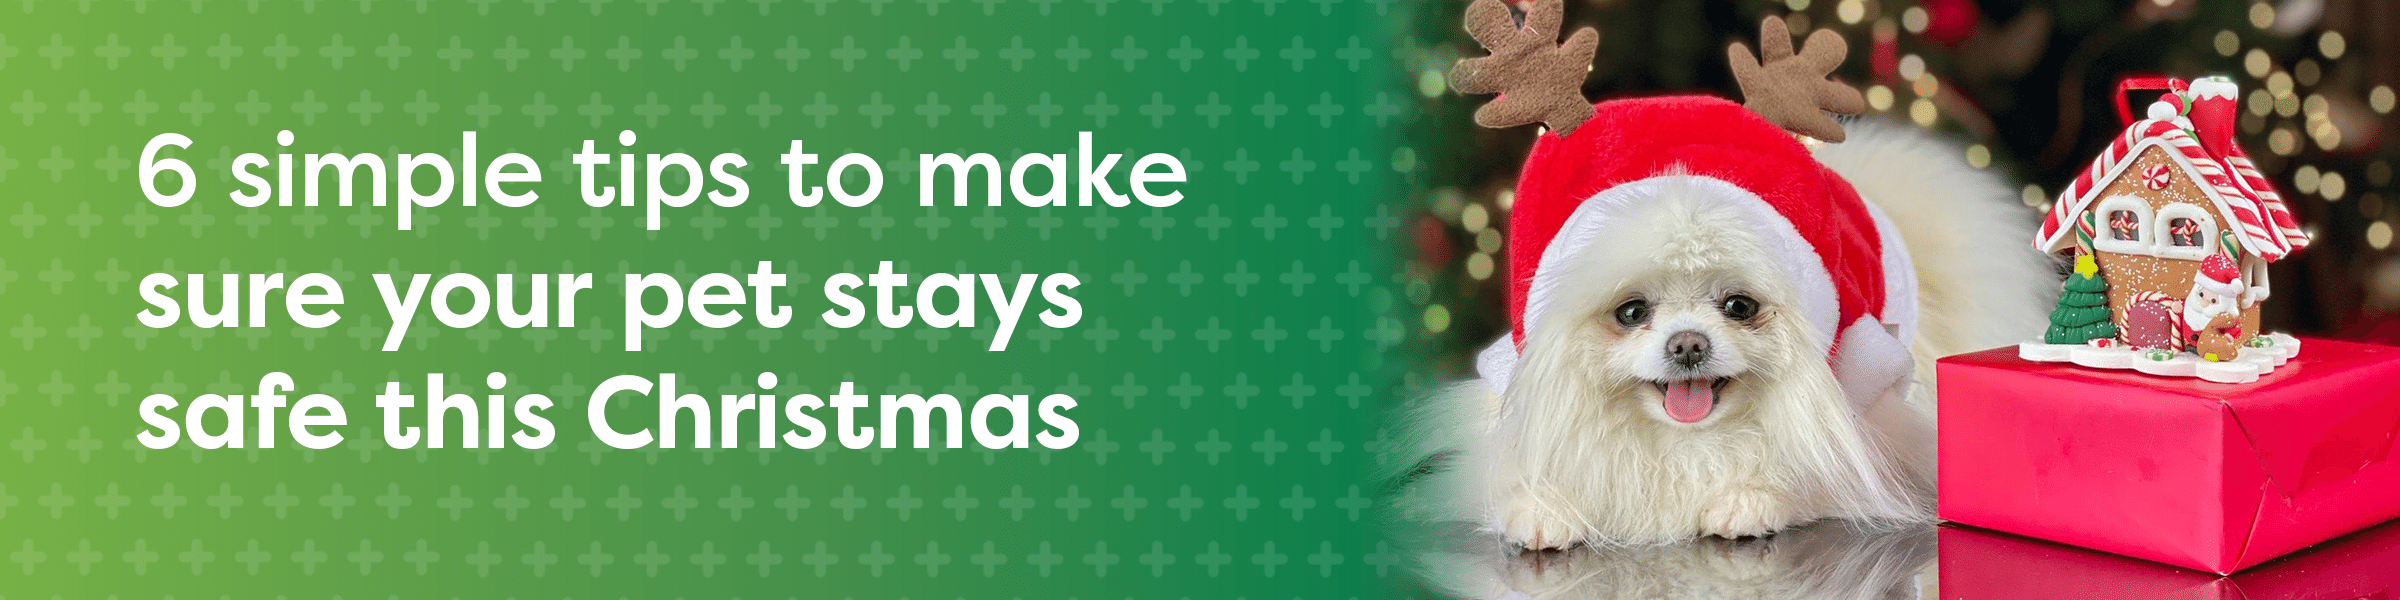 6 tips to keep your pets safe this Xmas